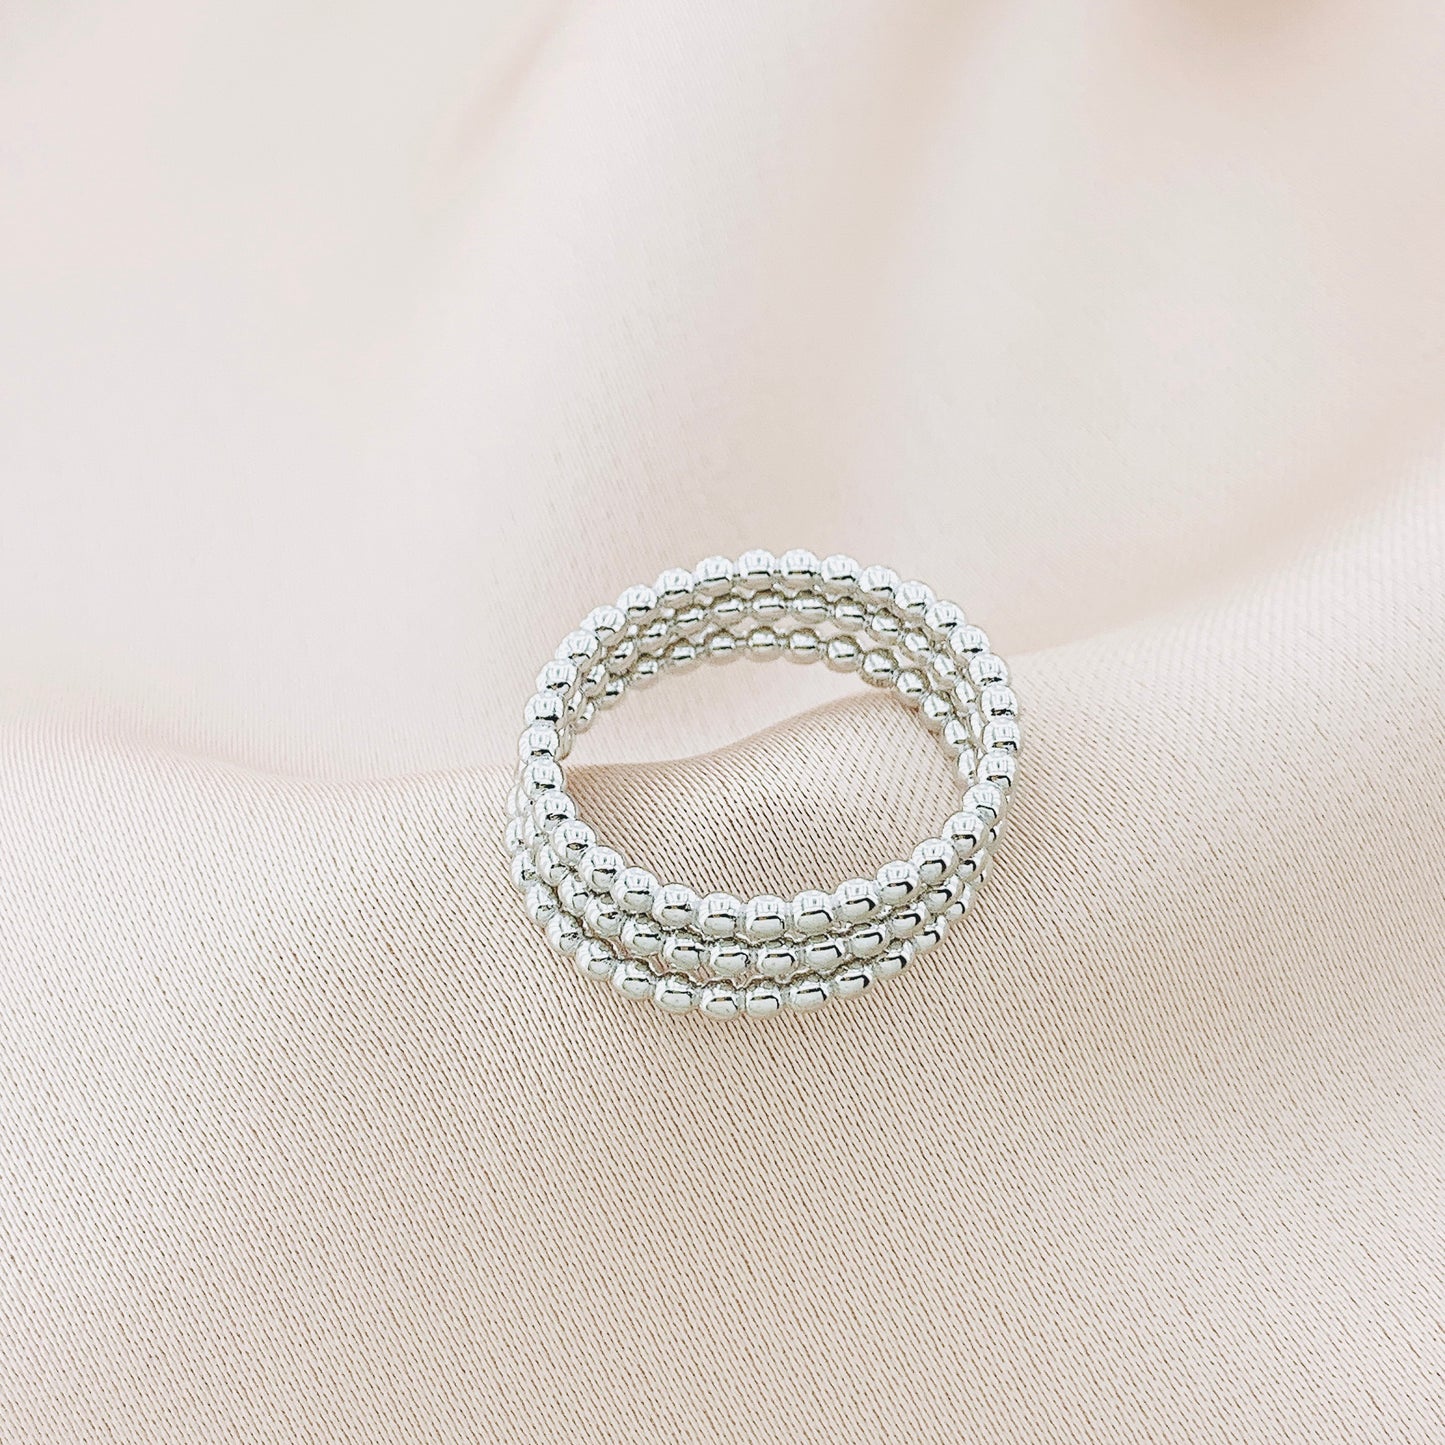 925 Silver Stackable Ring Sets